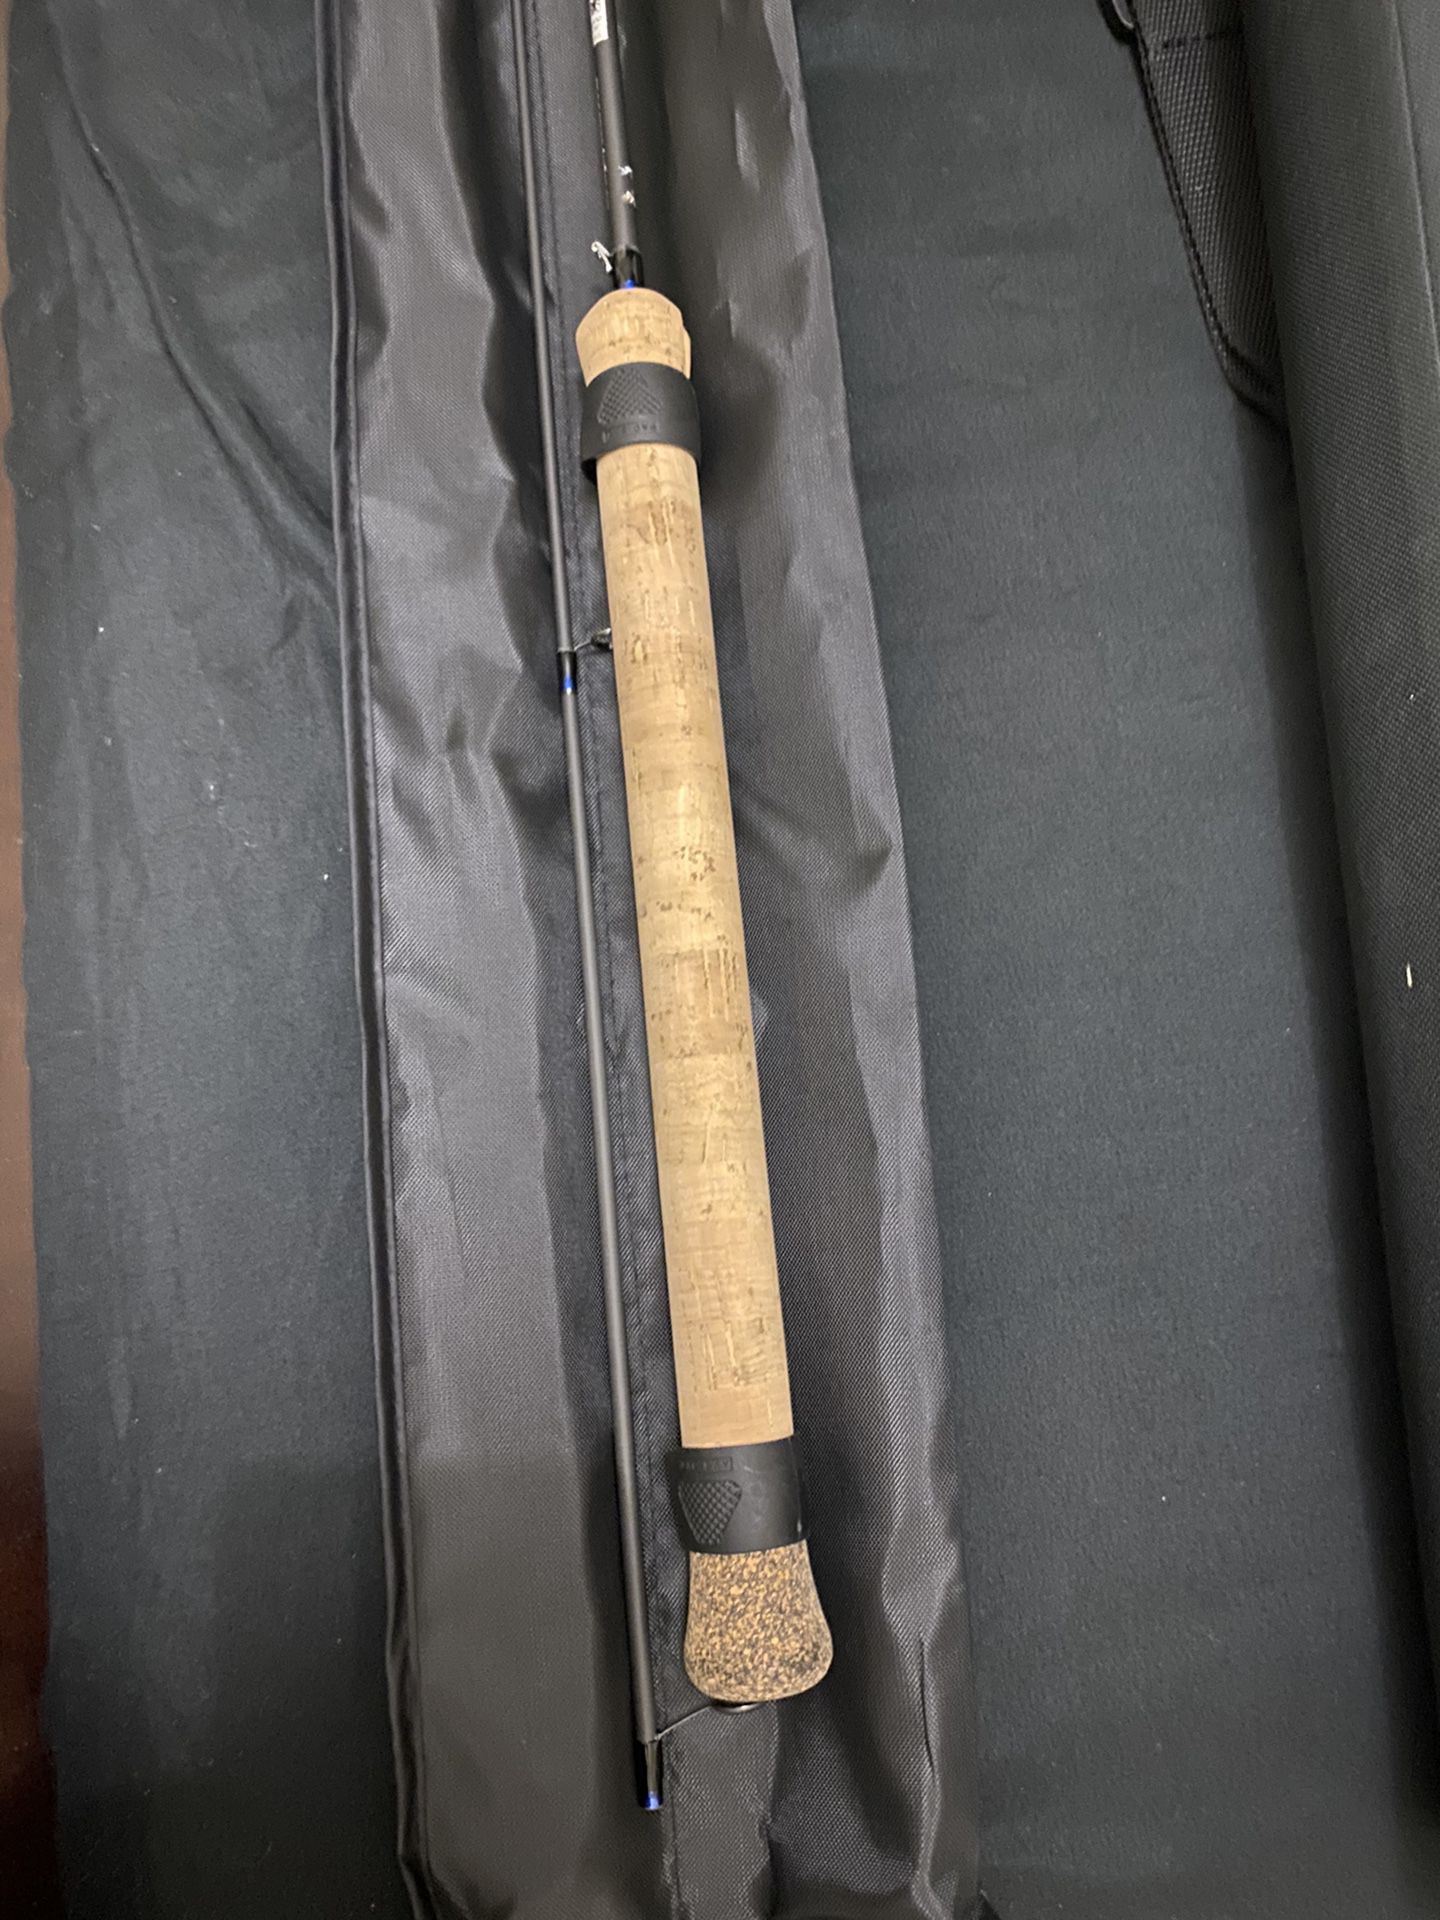 Trout JUICY BEAVER ROD for Sale in Santa Ana, CA - OfferUp